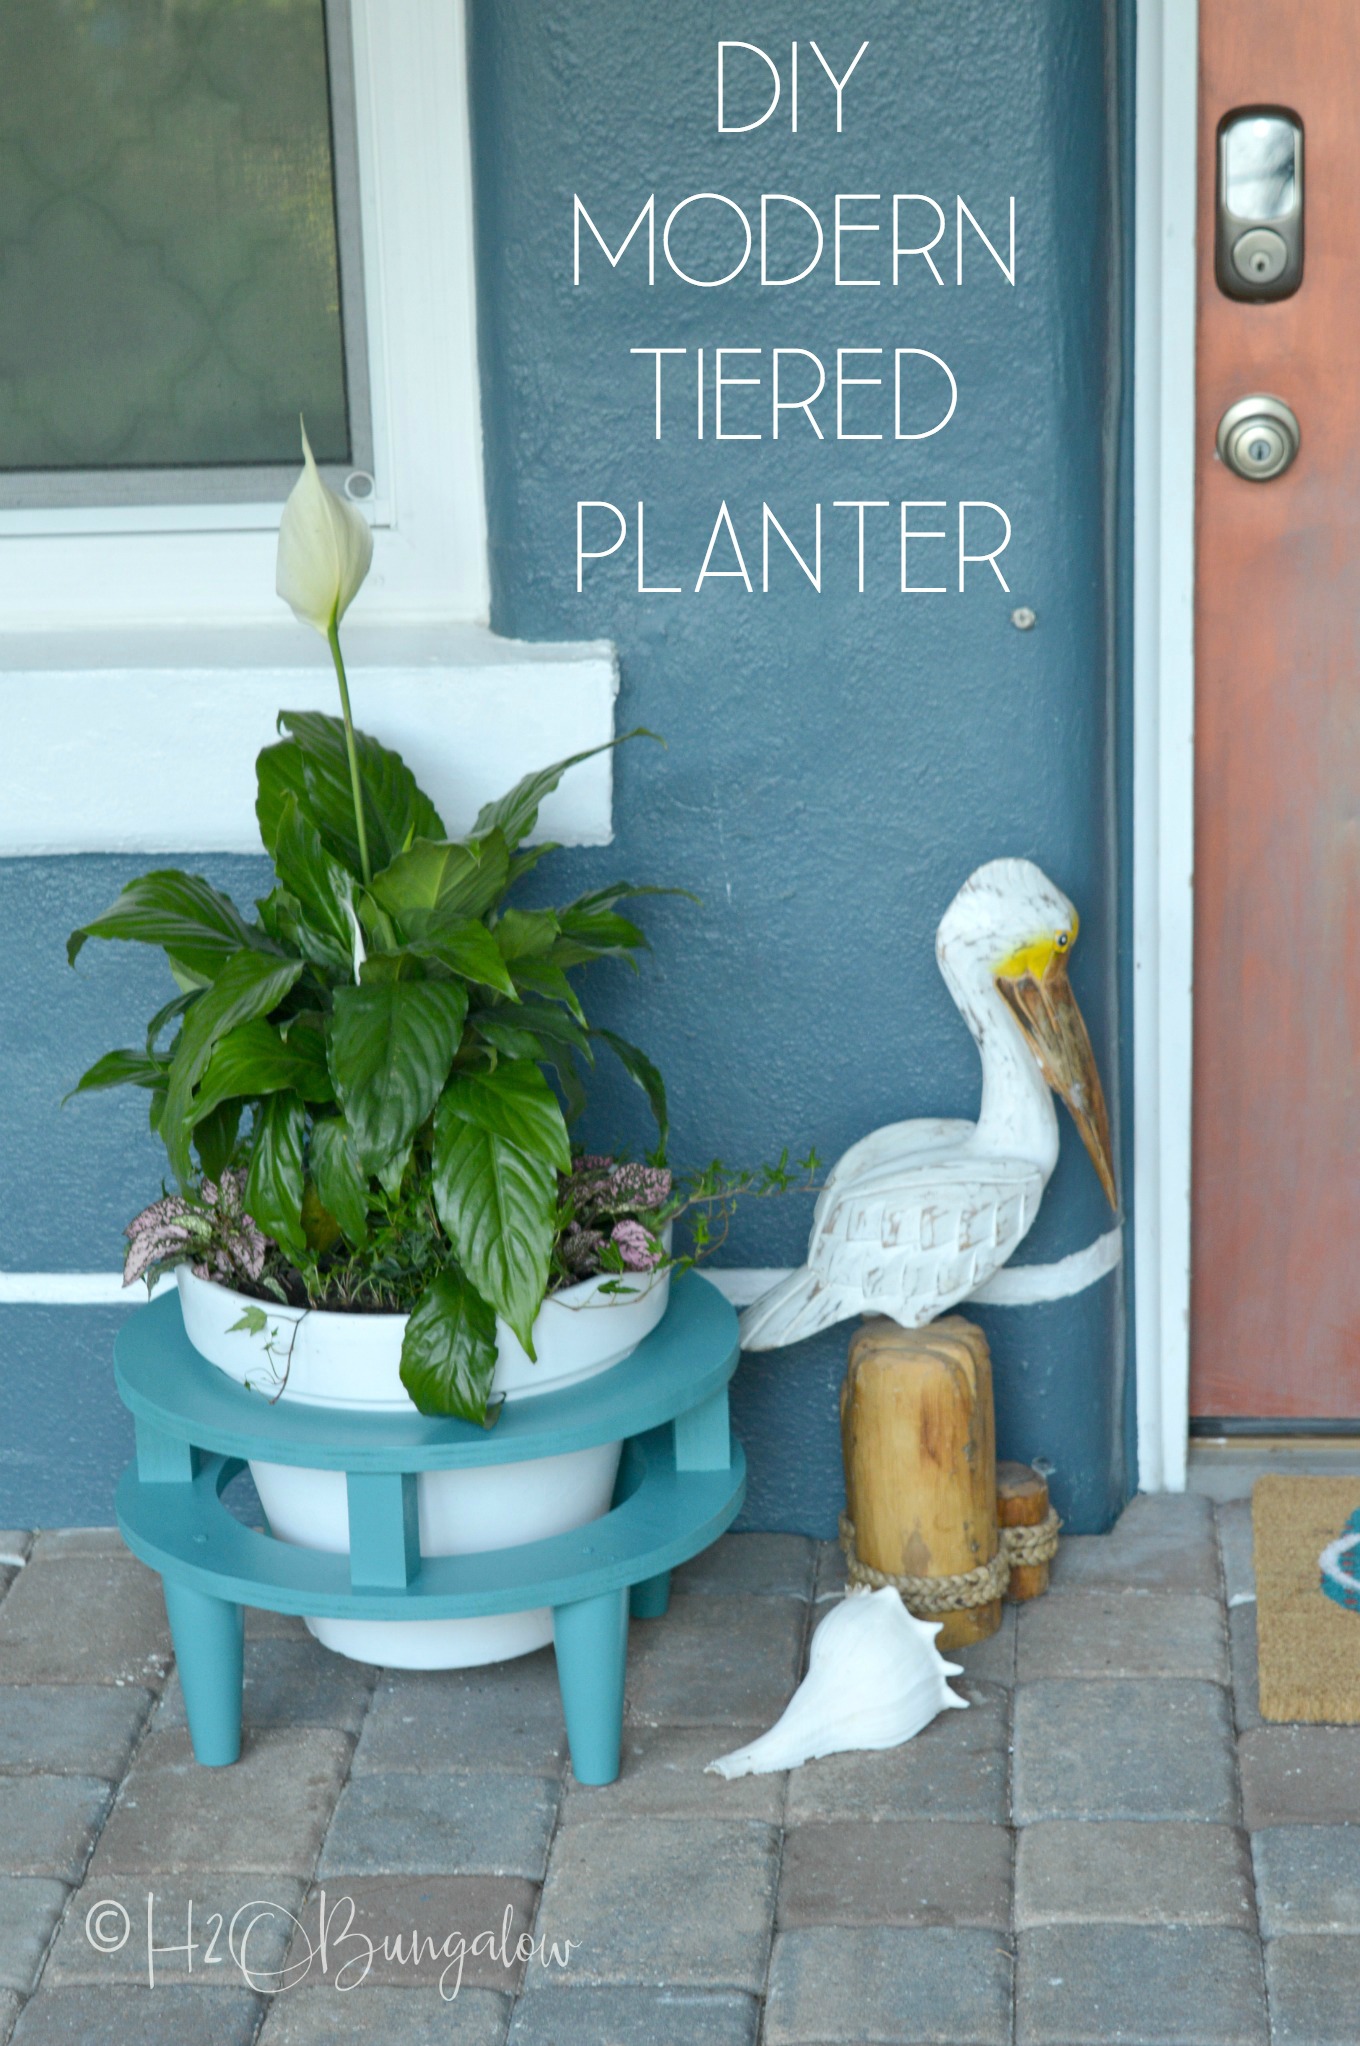 DIY mid century modern plant stand tutorial and video tutorial Make a tiered wood planter to hold your favorite plant in a modern plant stand. Beautiful outside painted in bright colors or color blocked or make the DIY plant stand in natural wood for a modern indoor planter stand. 